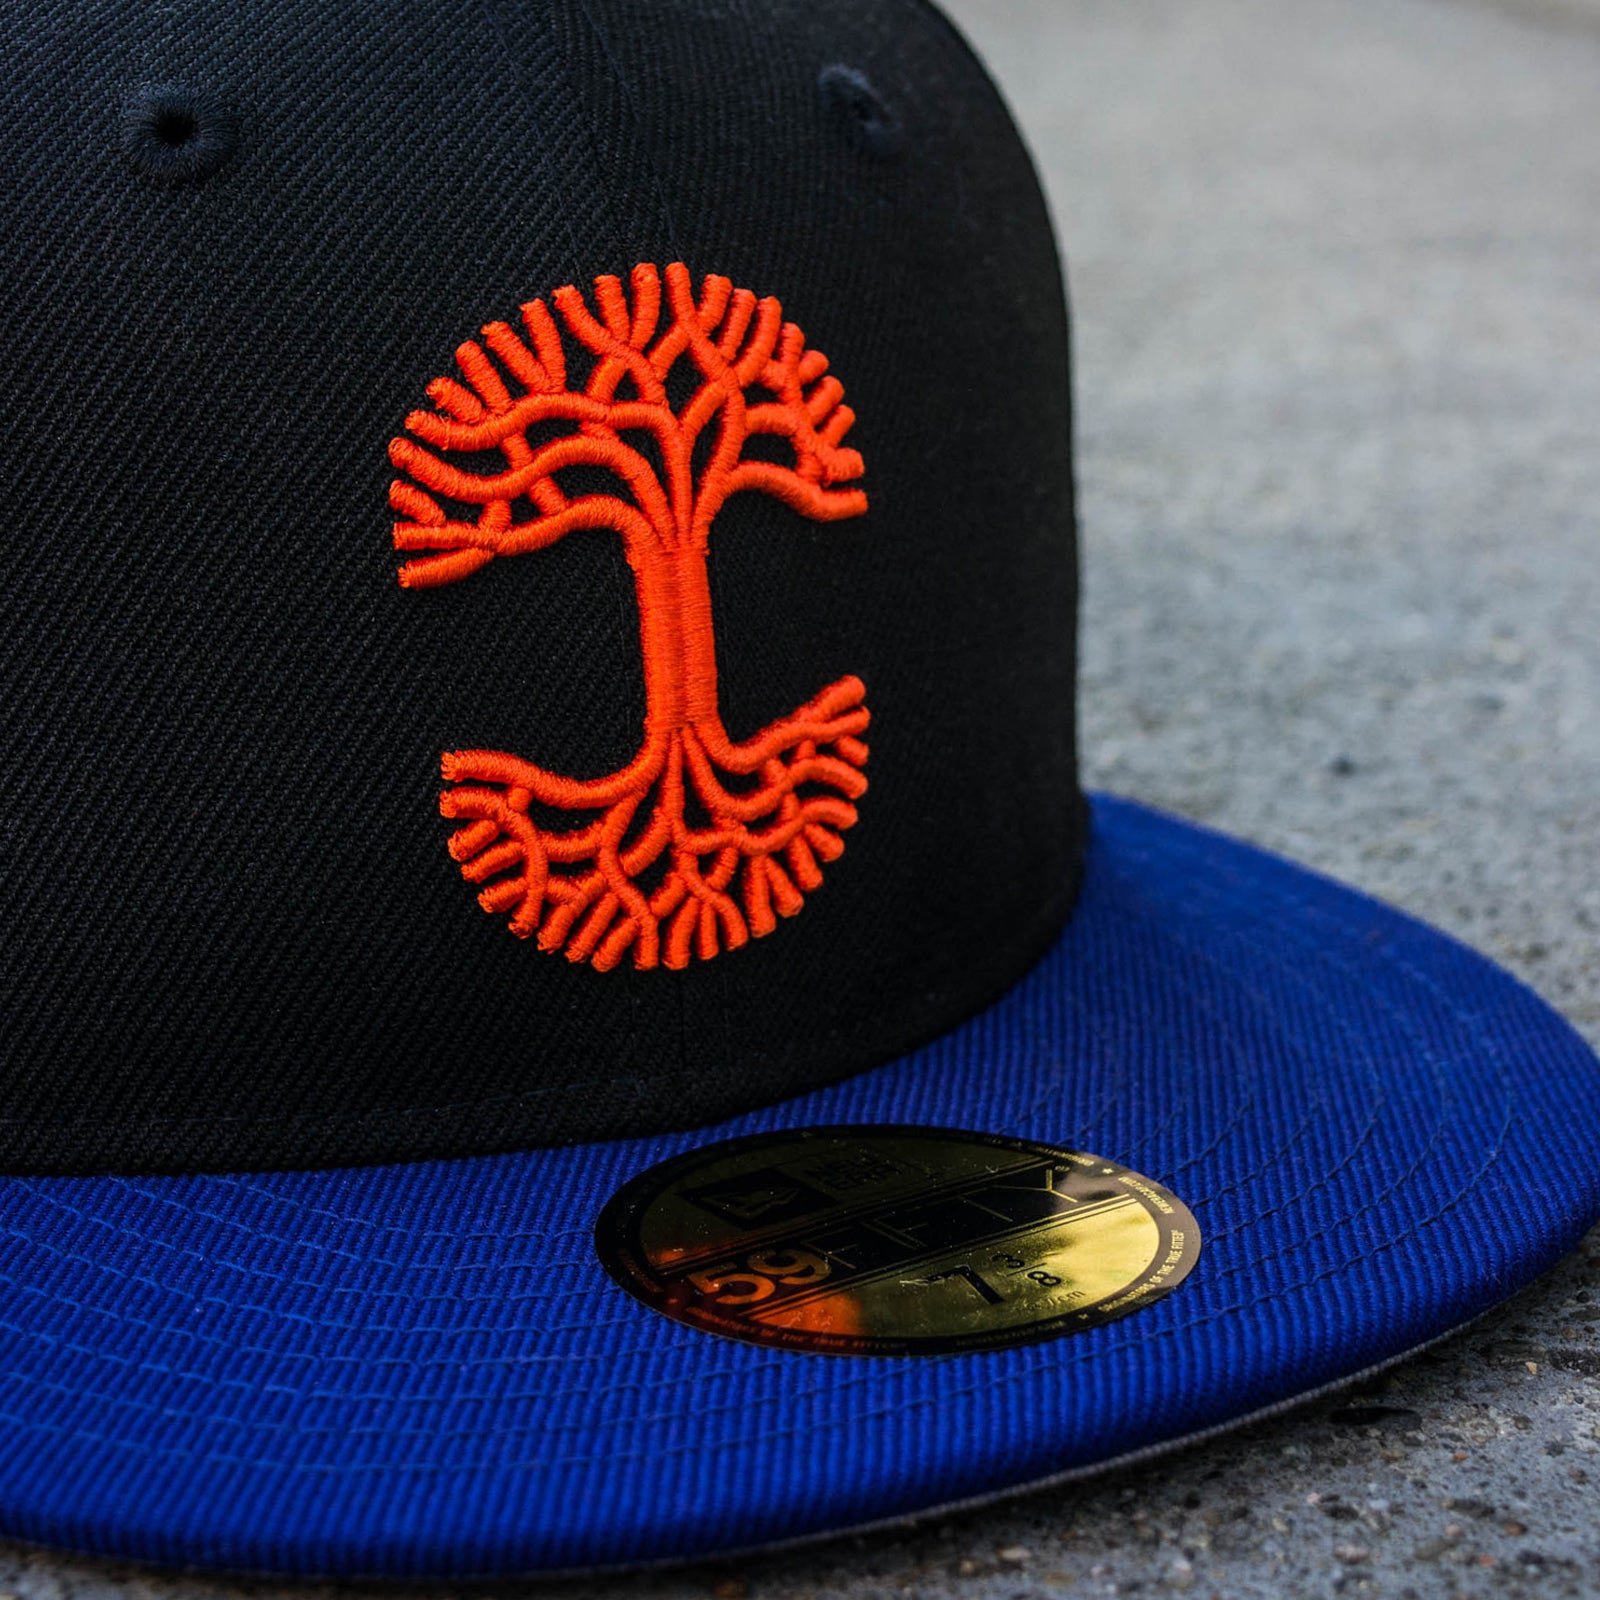 Close-up red embroidered Oaklandish logo on black fitted cap with New Era sticker on a blue bill.